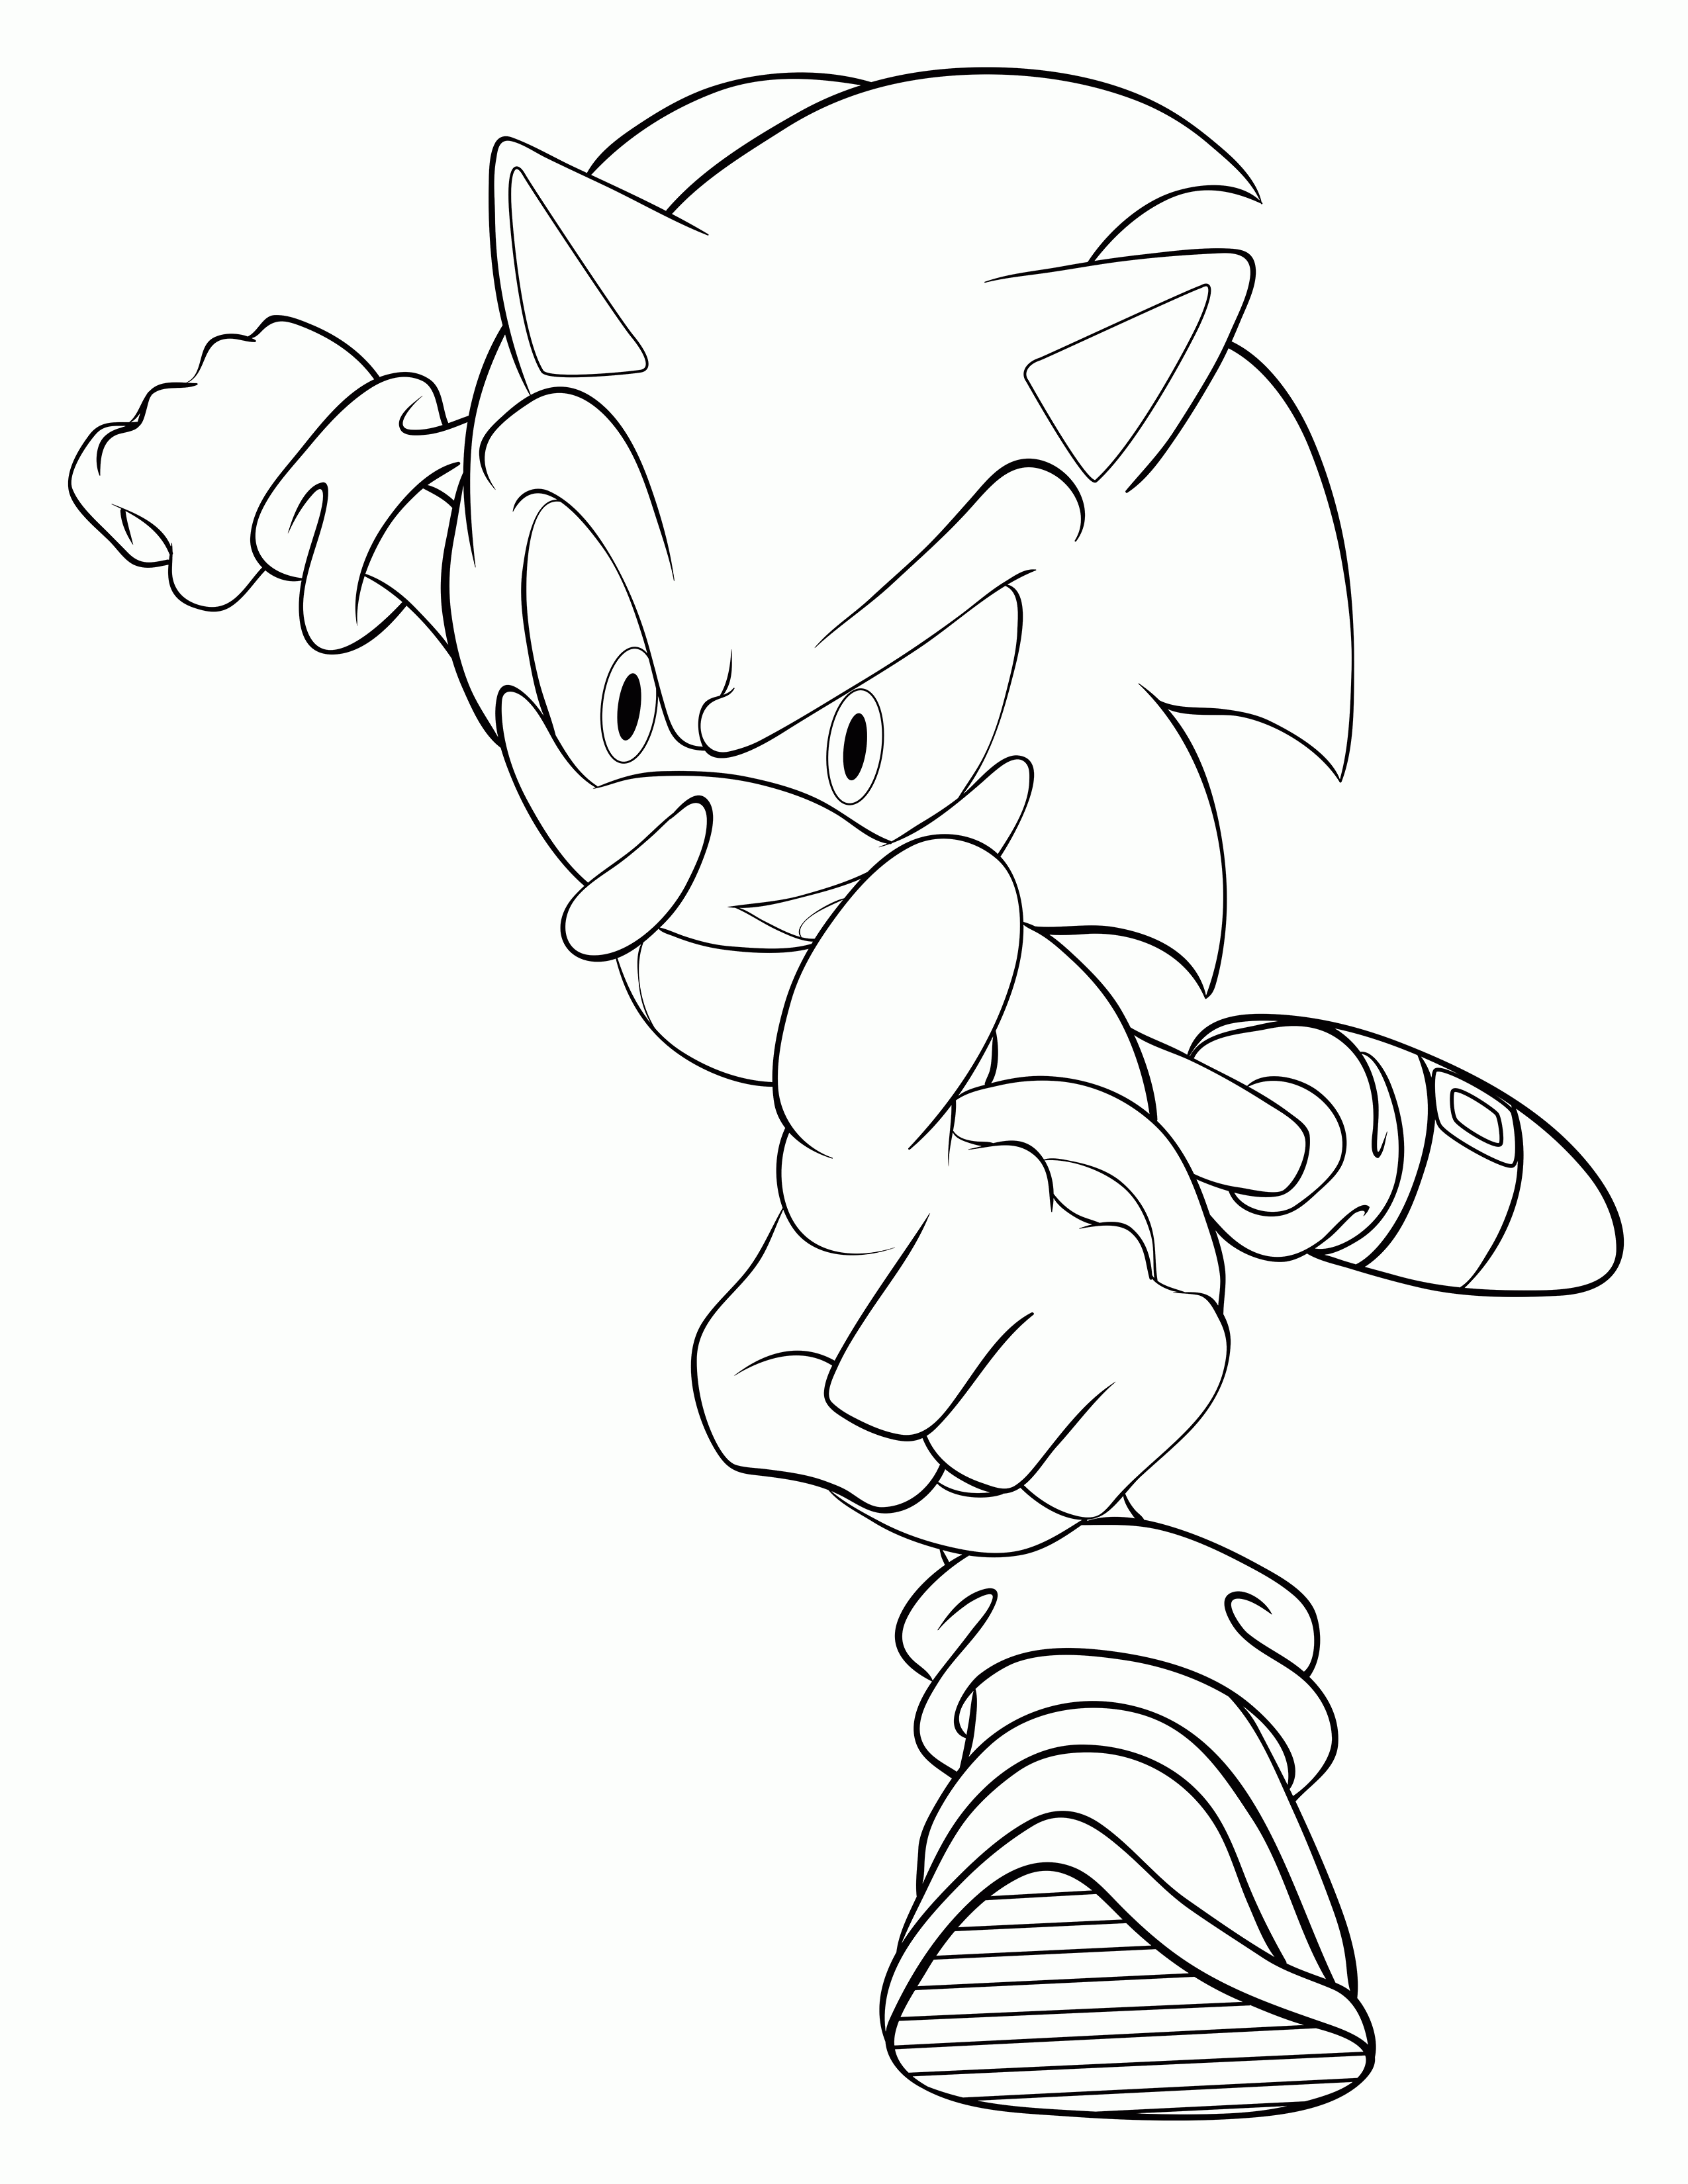 coloring page 1 - Sonic the Hedgehog (1) by Xaolin26 on DeviantArt